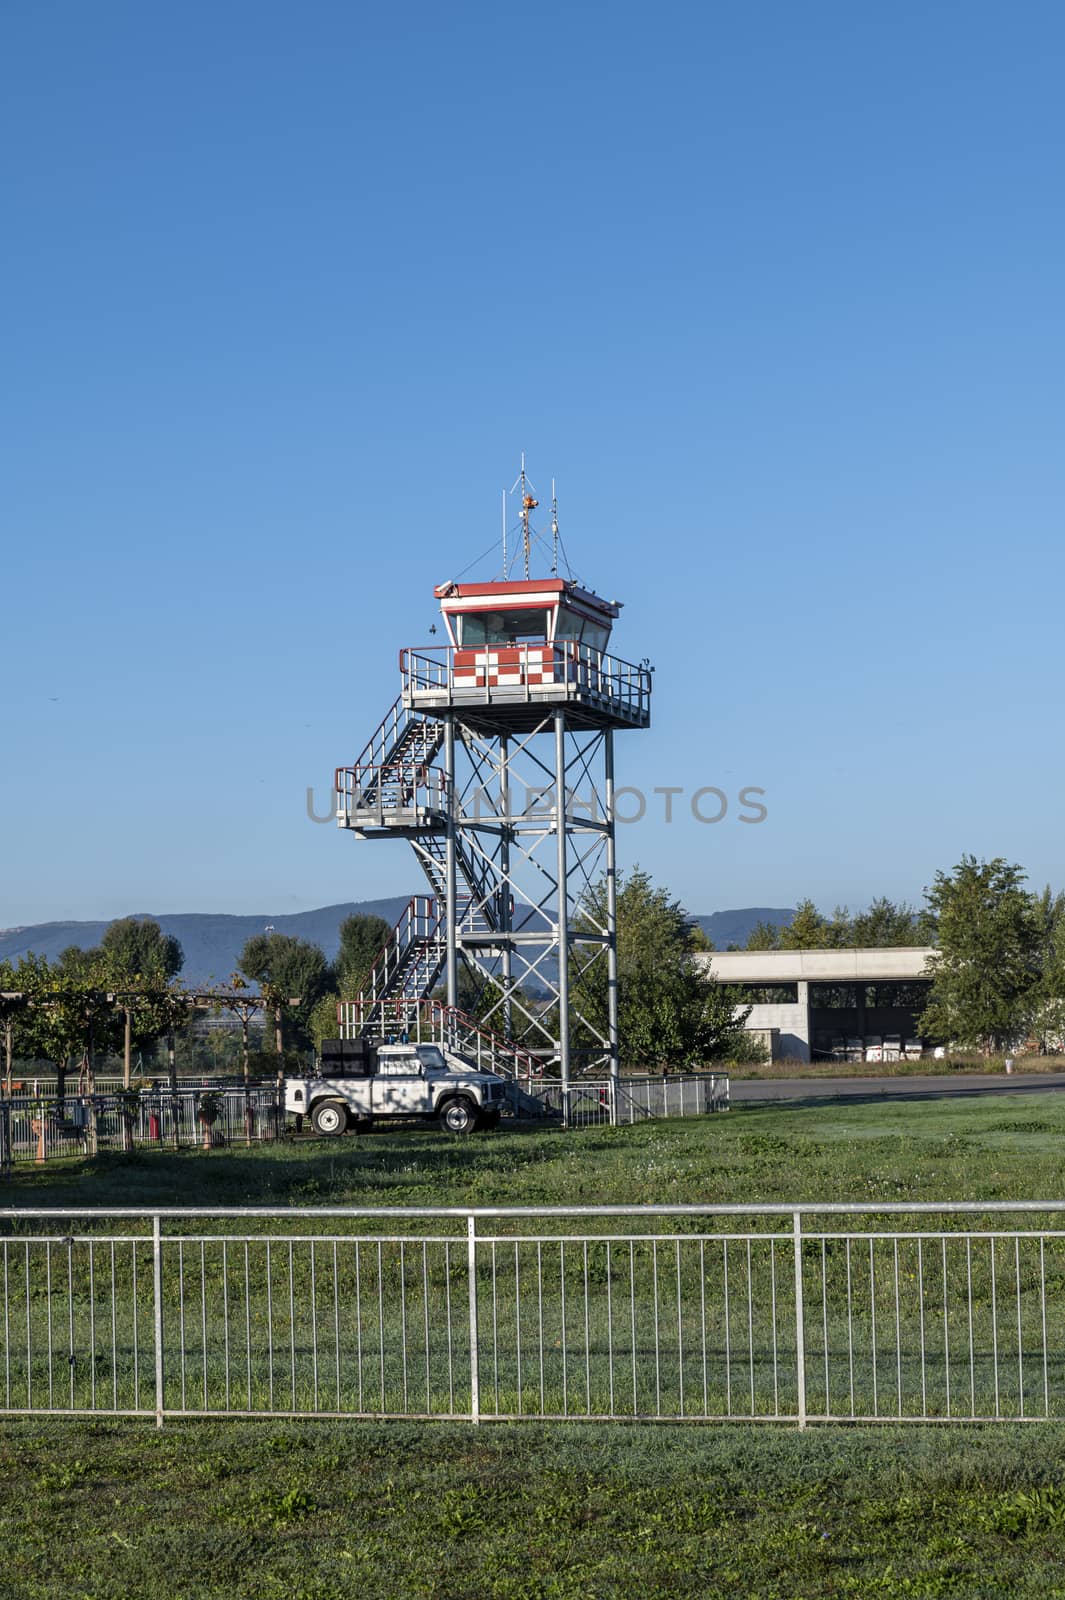 watchtower of a super light aircraft airport on a sunny day